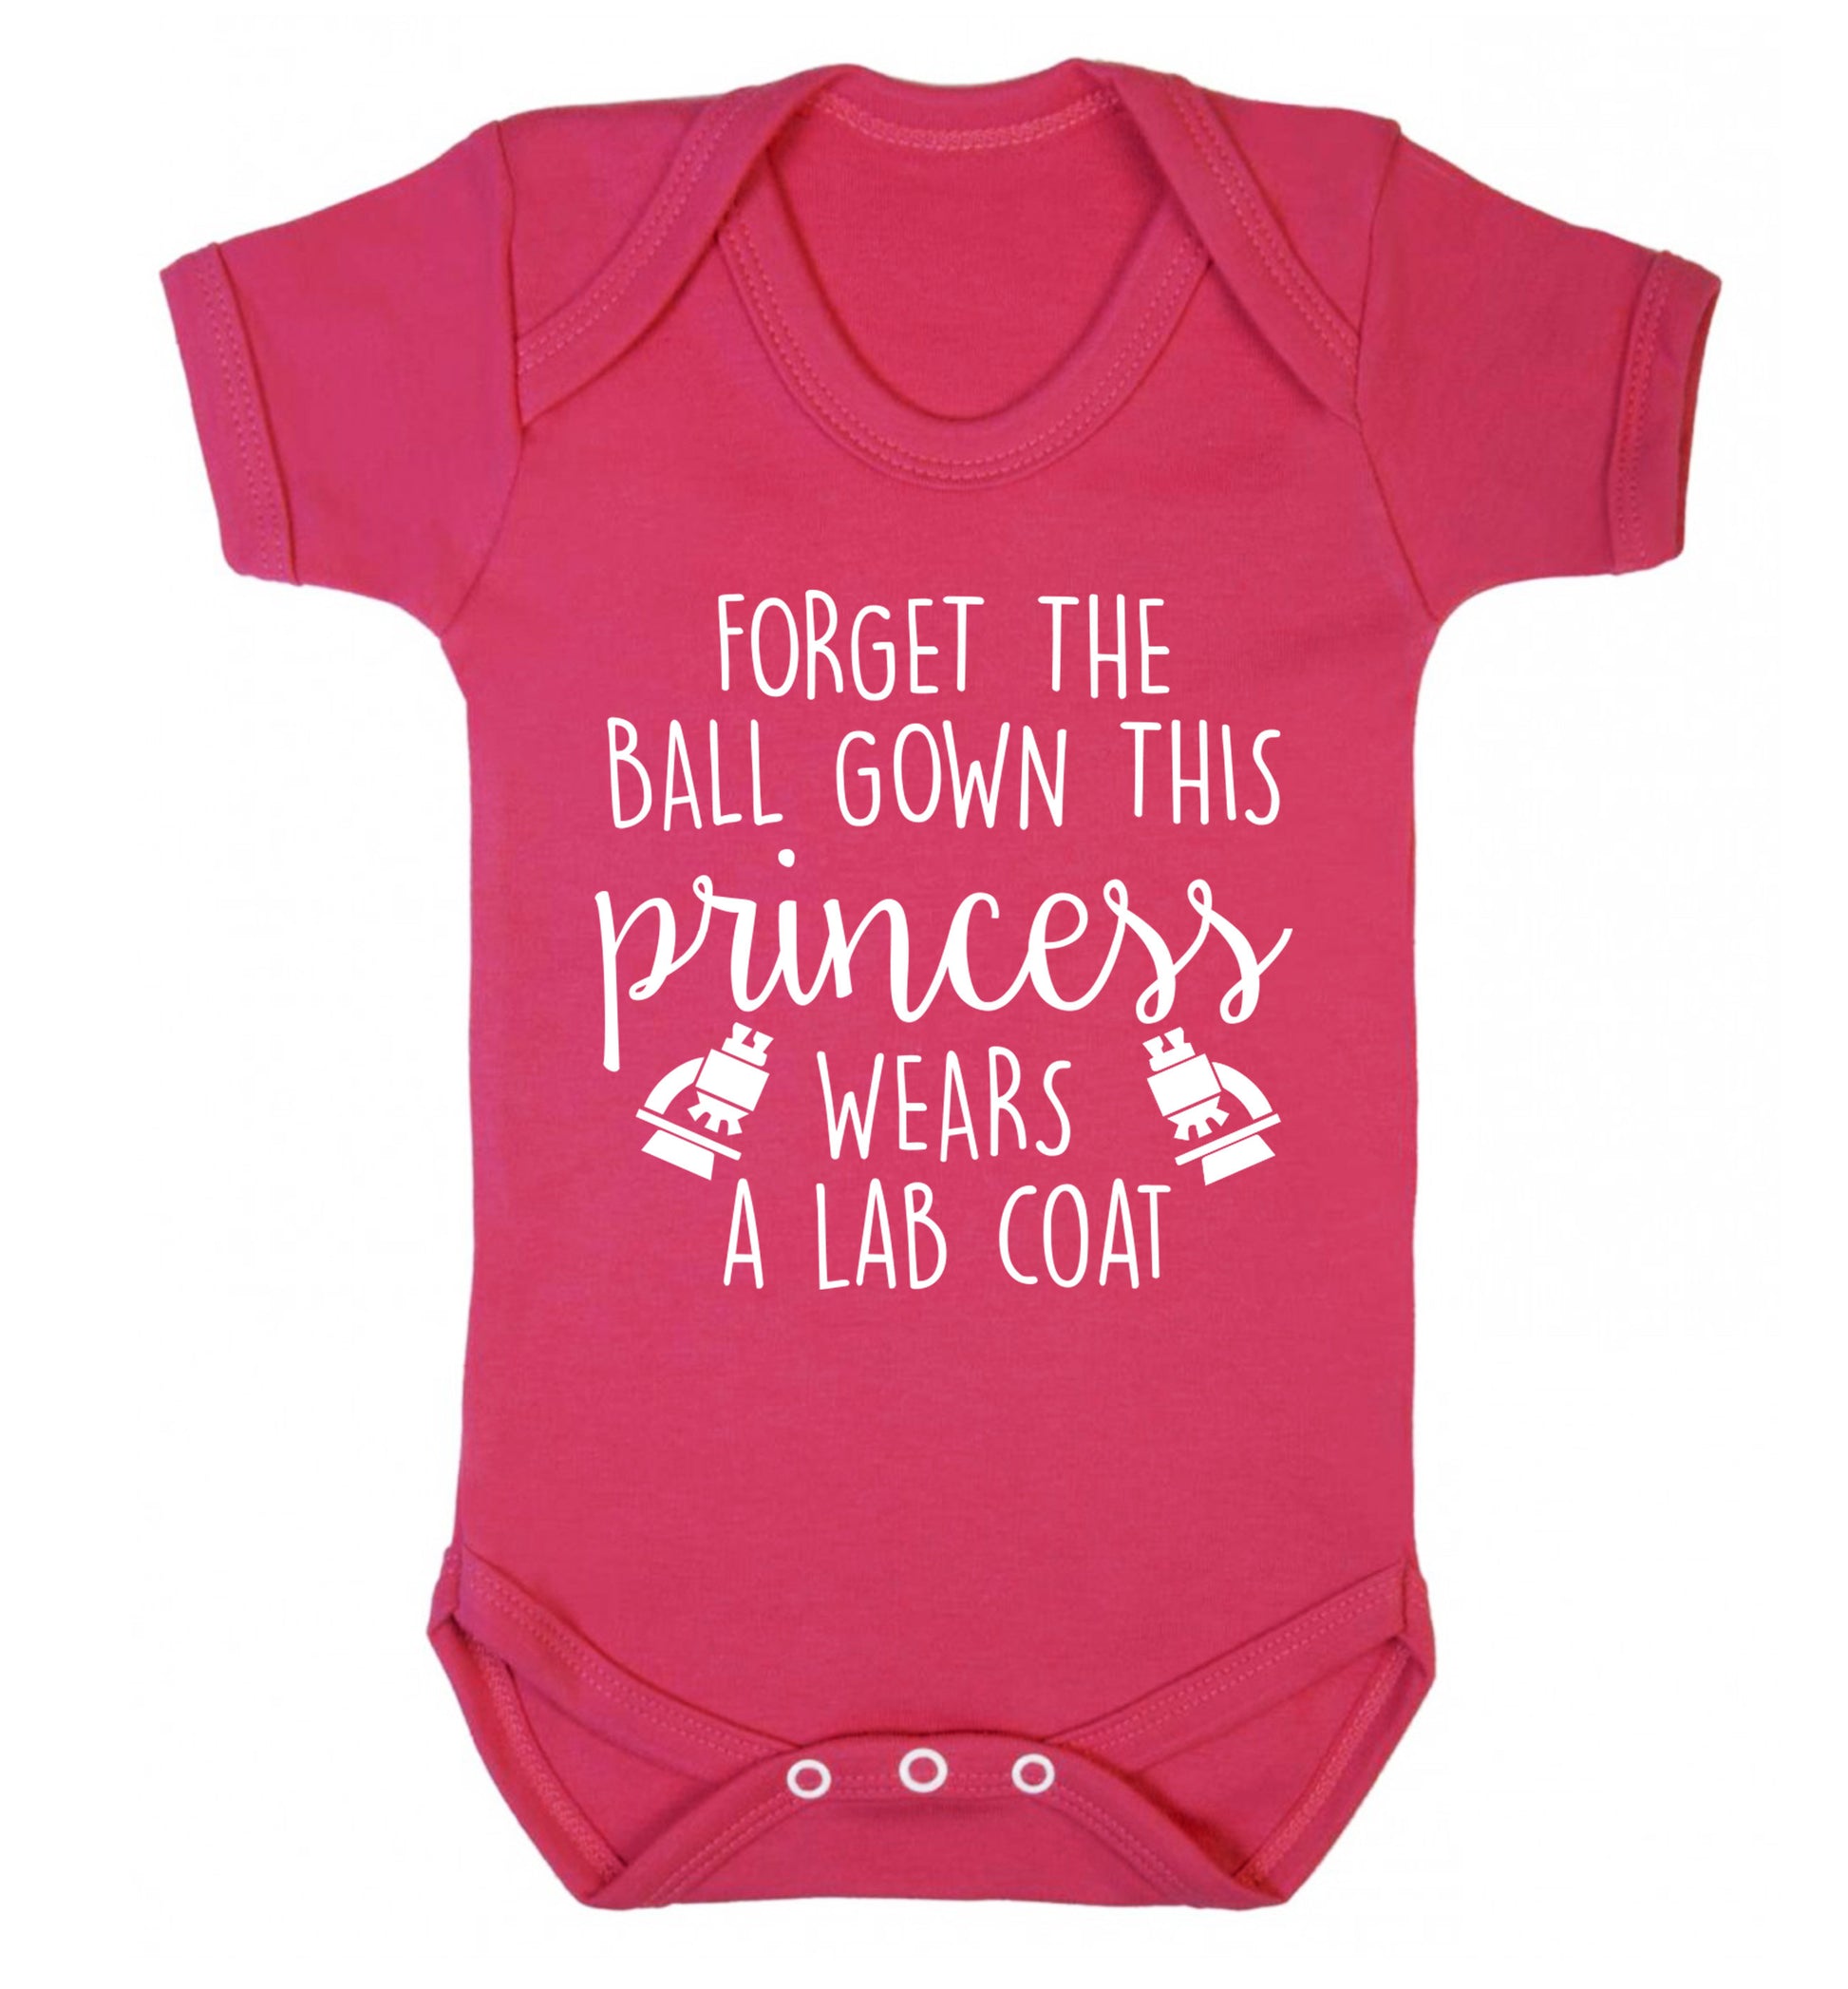 Forget the ball gown this princess wears a lab coat Baby Vest dark pink 18-24 months